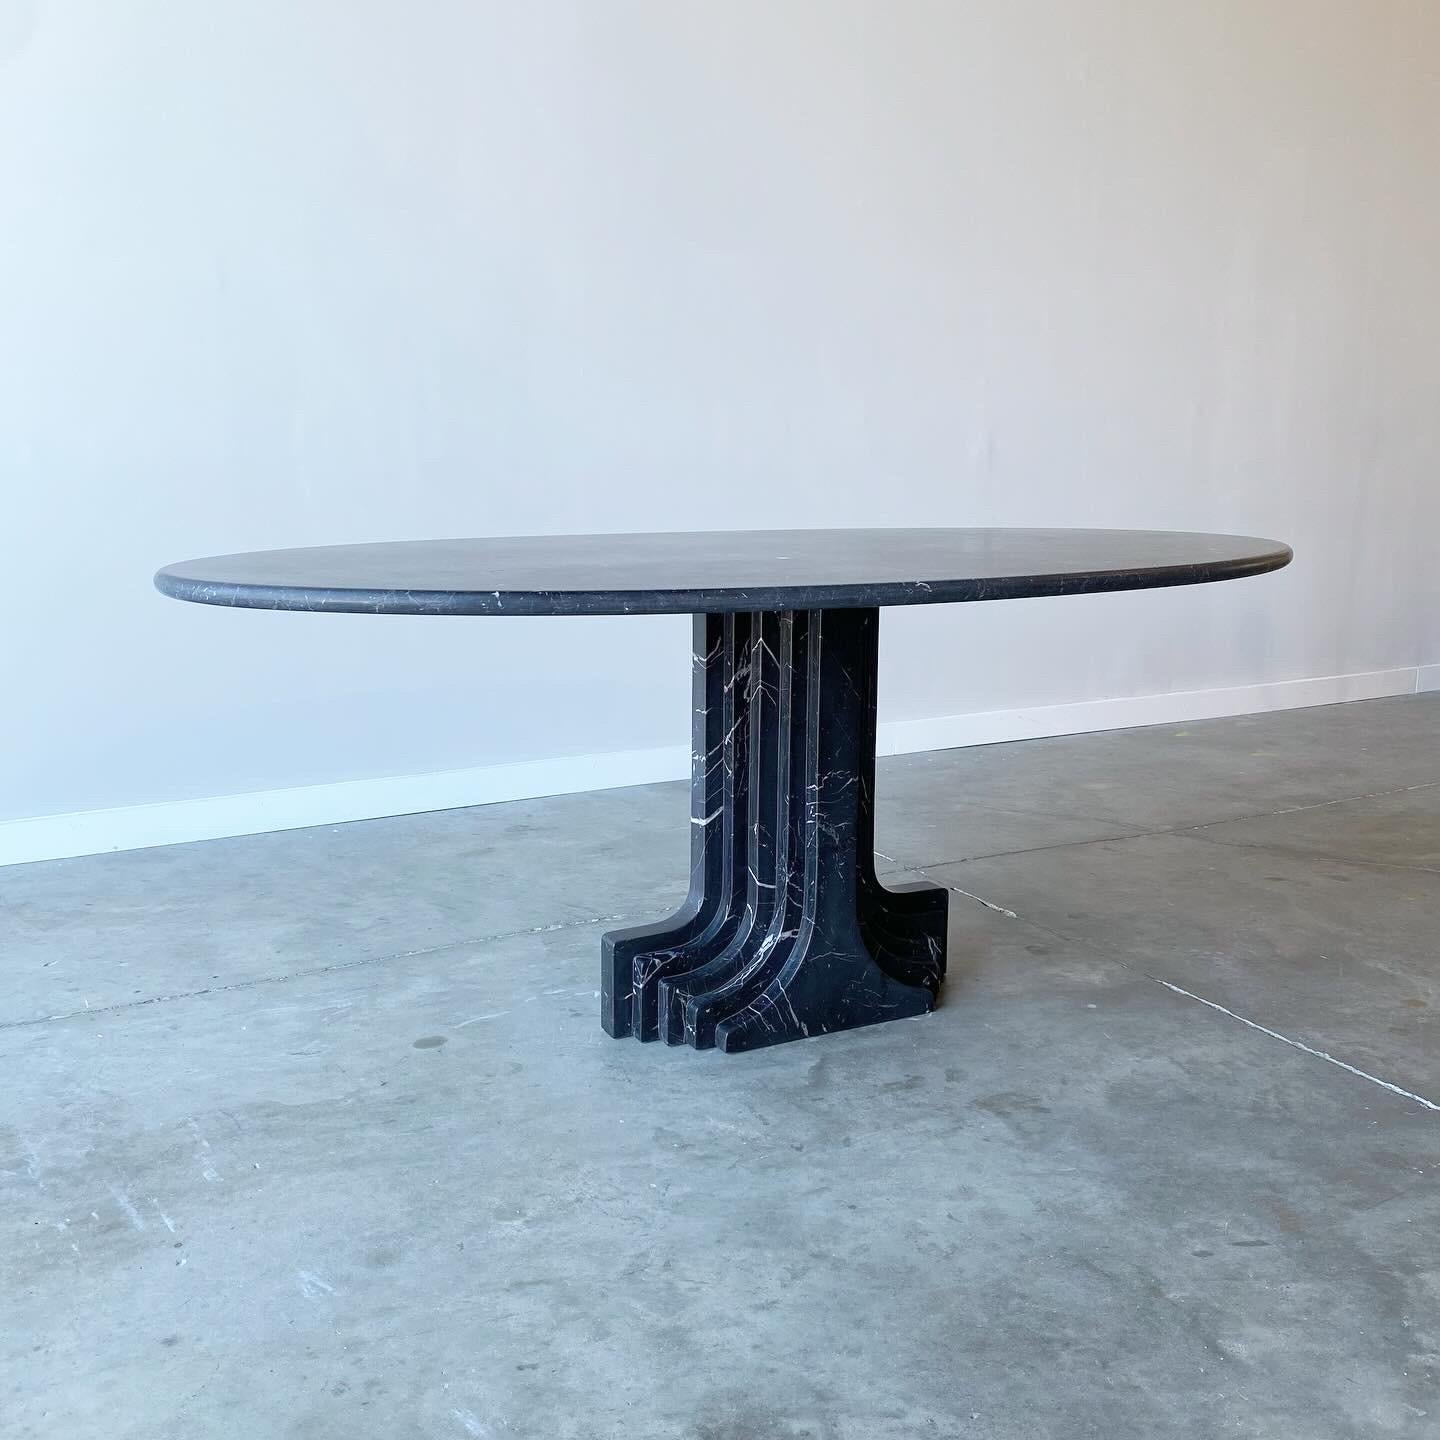 Carlo Scarpa Argo Dining Table in Nero Marquina Marble, Cattelan Italia 

A stunning vintage example with original Catalan Italia packing tape marking the bottom.  This black marble table has been buffed to a satin finish so the table shows a dark